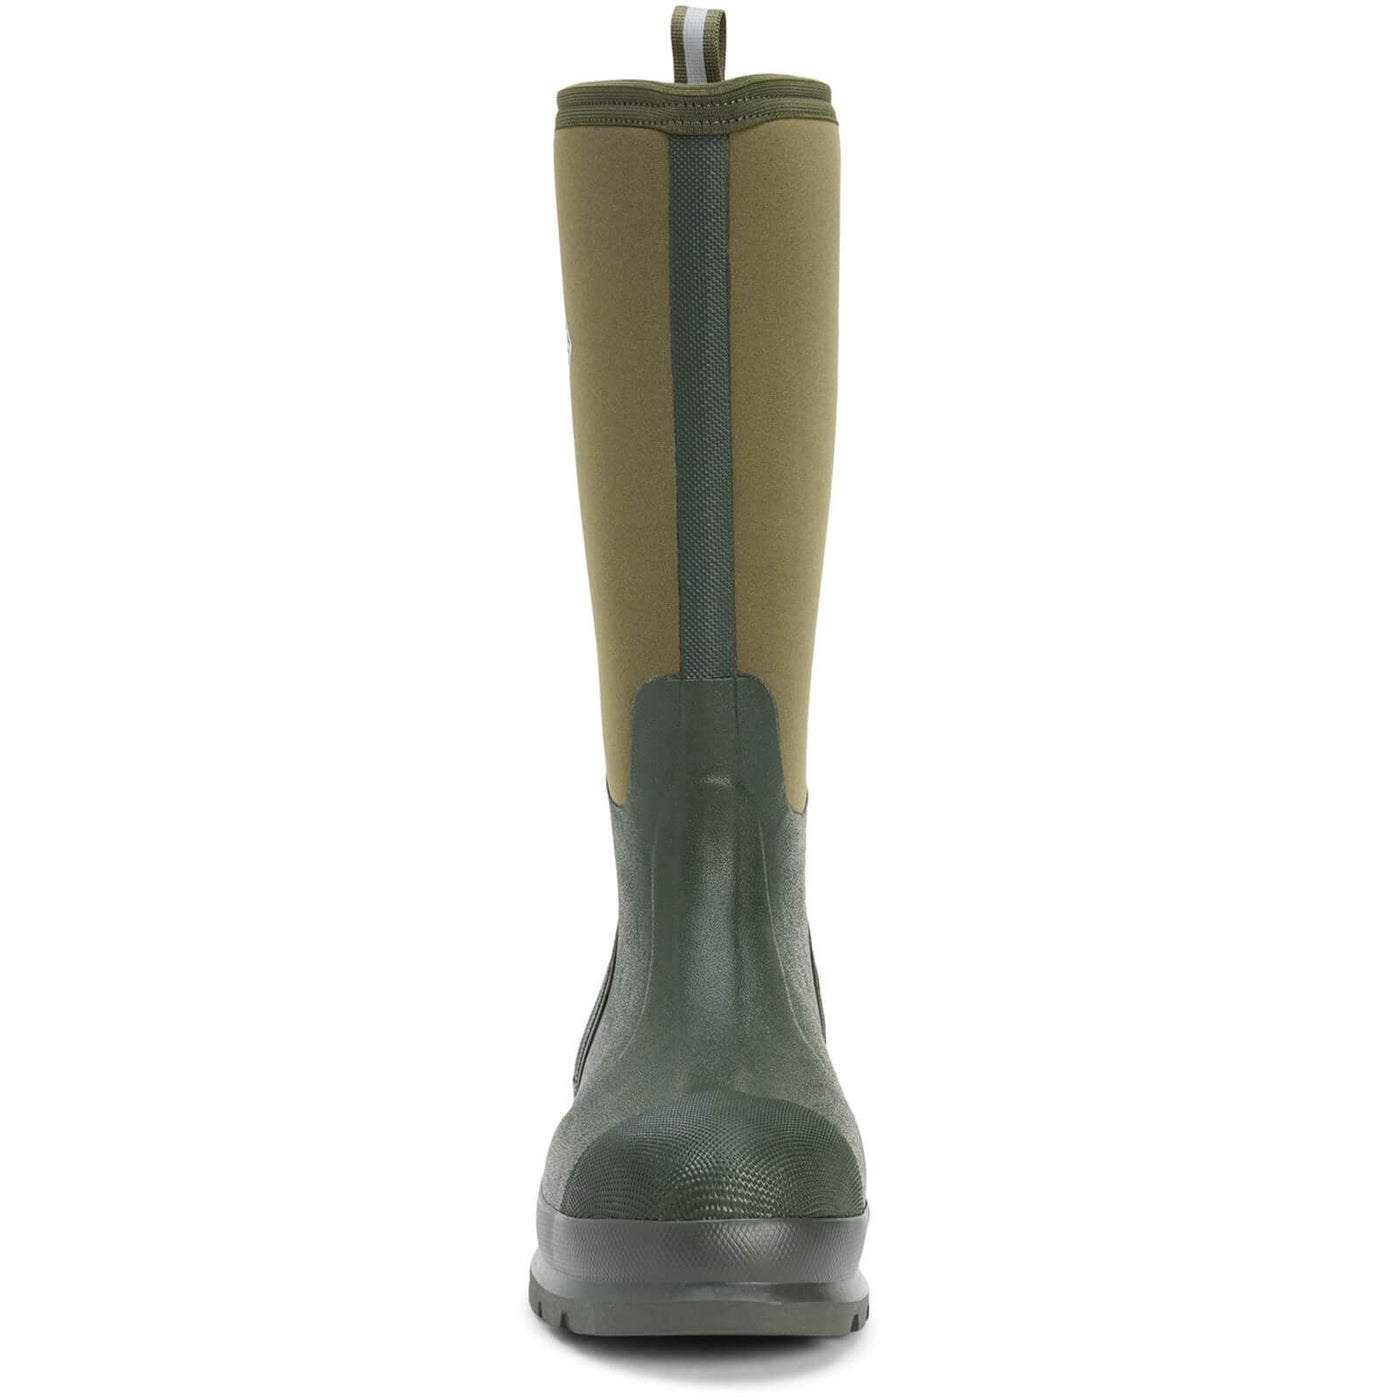 Muck Boots Chore Classic Hi Patterned Wellies Moss 3#colour_moss